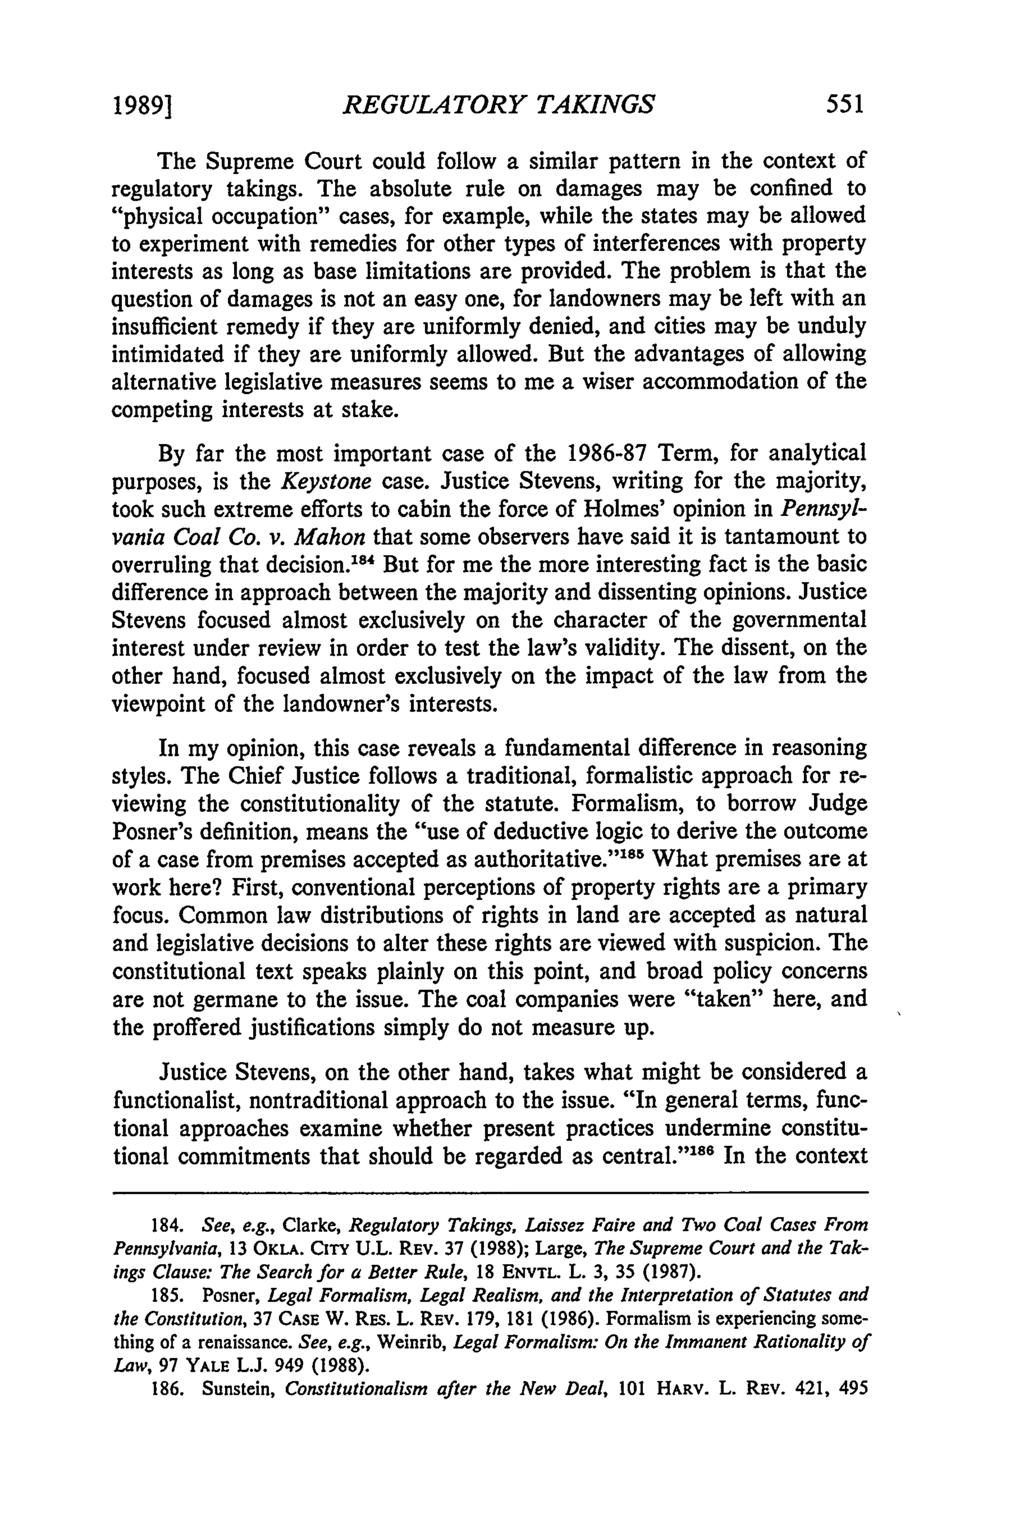 19891 Myers: Some Observations on the Analysis of Regulatory Takings in the Re REGULATORY TAKINGS The Supreme Court could follow a similar pattern in the context of regulatory takings.